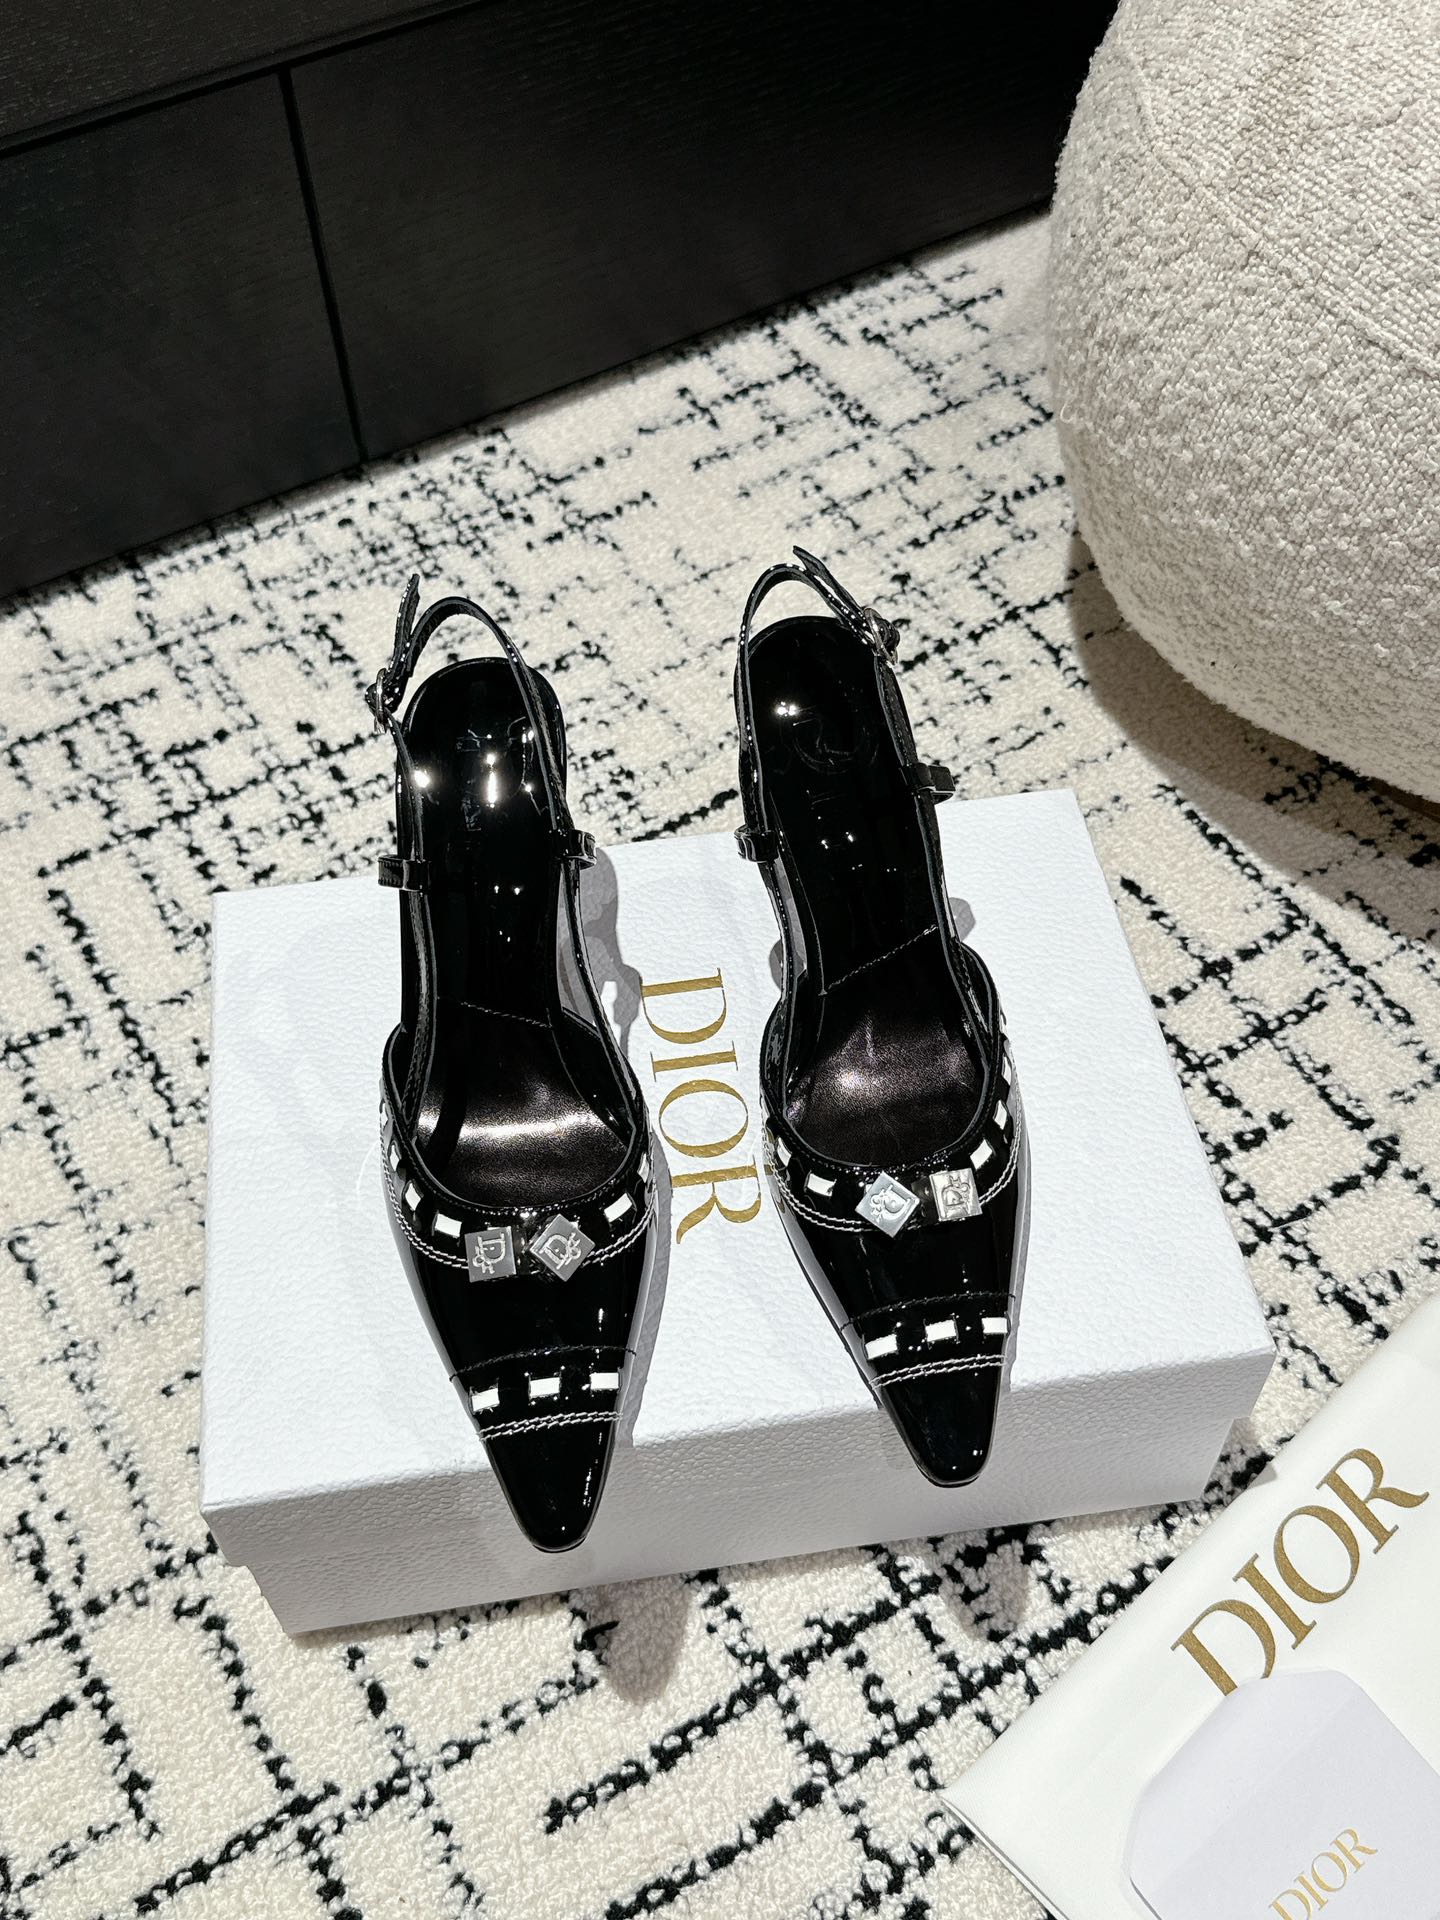 Dior Shoes High Heel Pumps Black Silver Cowhide Genuine Leather Patent Sheepskin Spring Collection Fashion